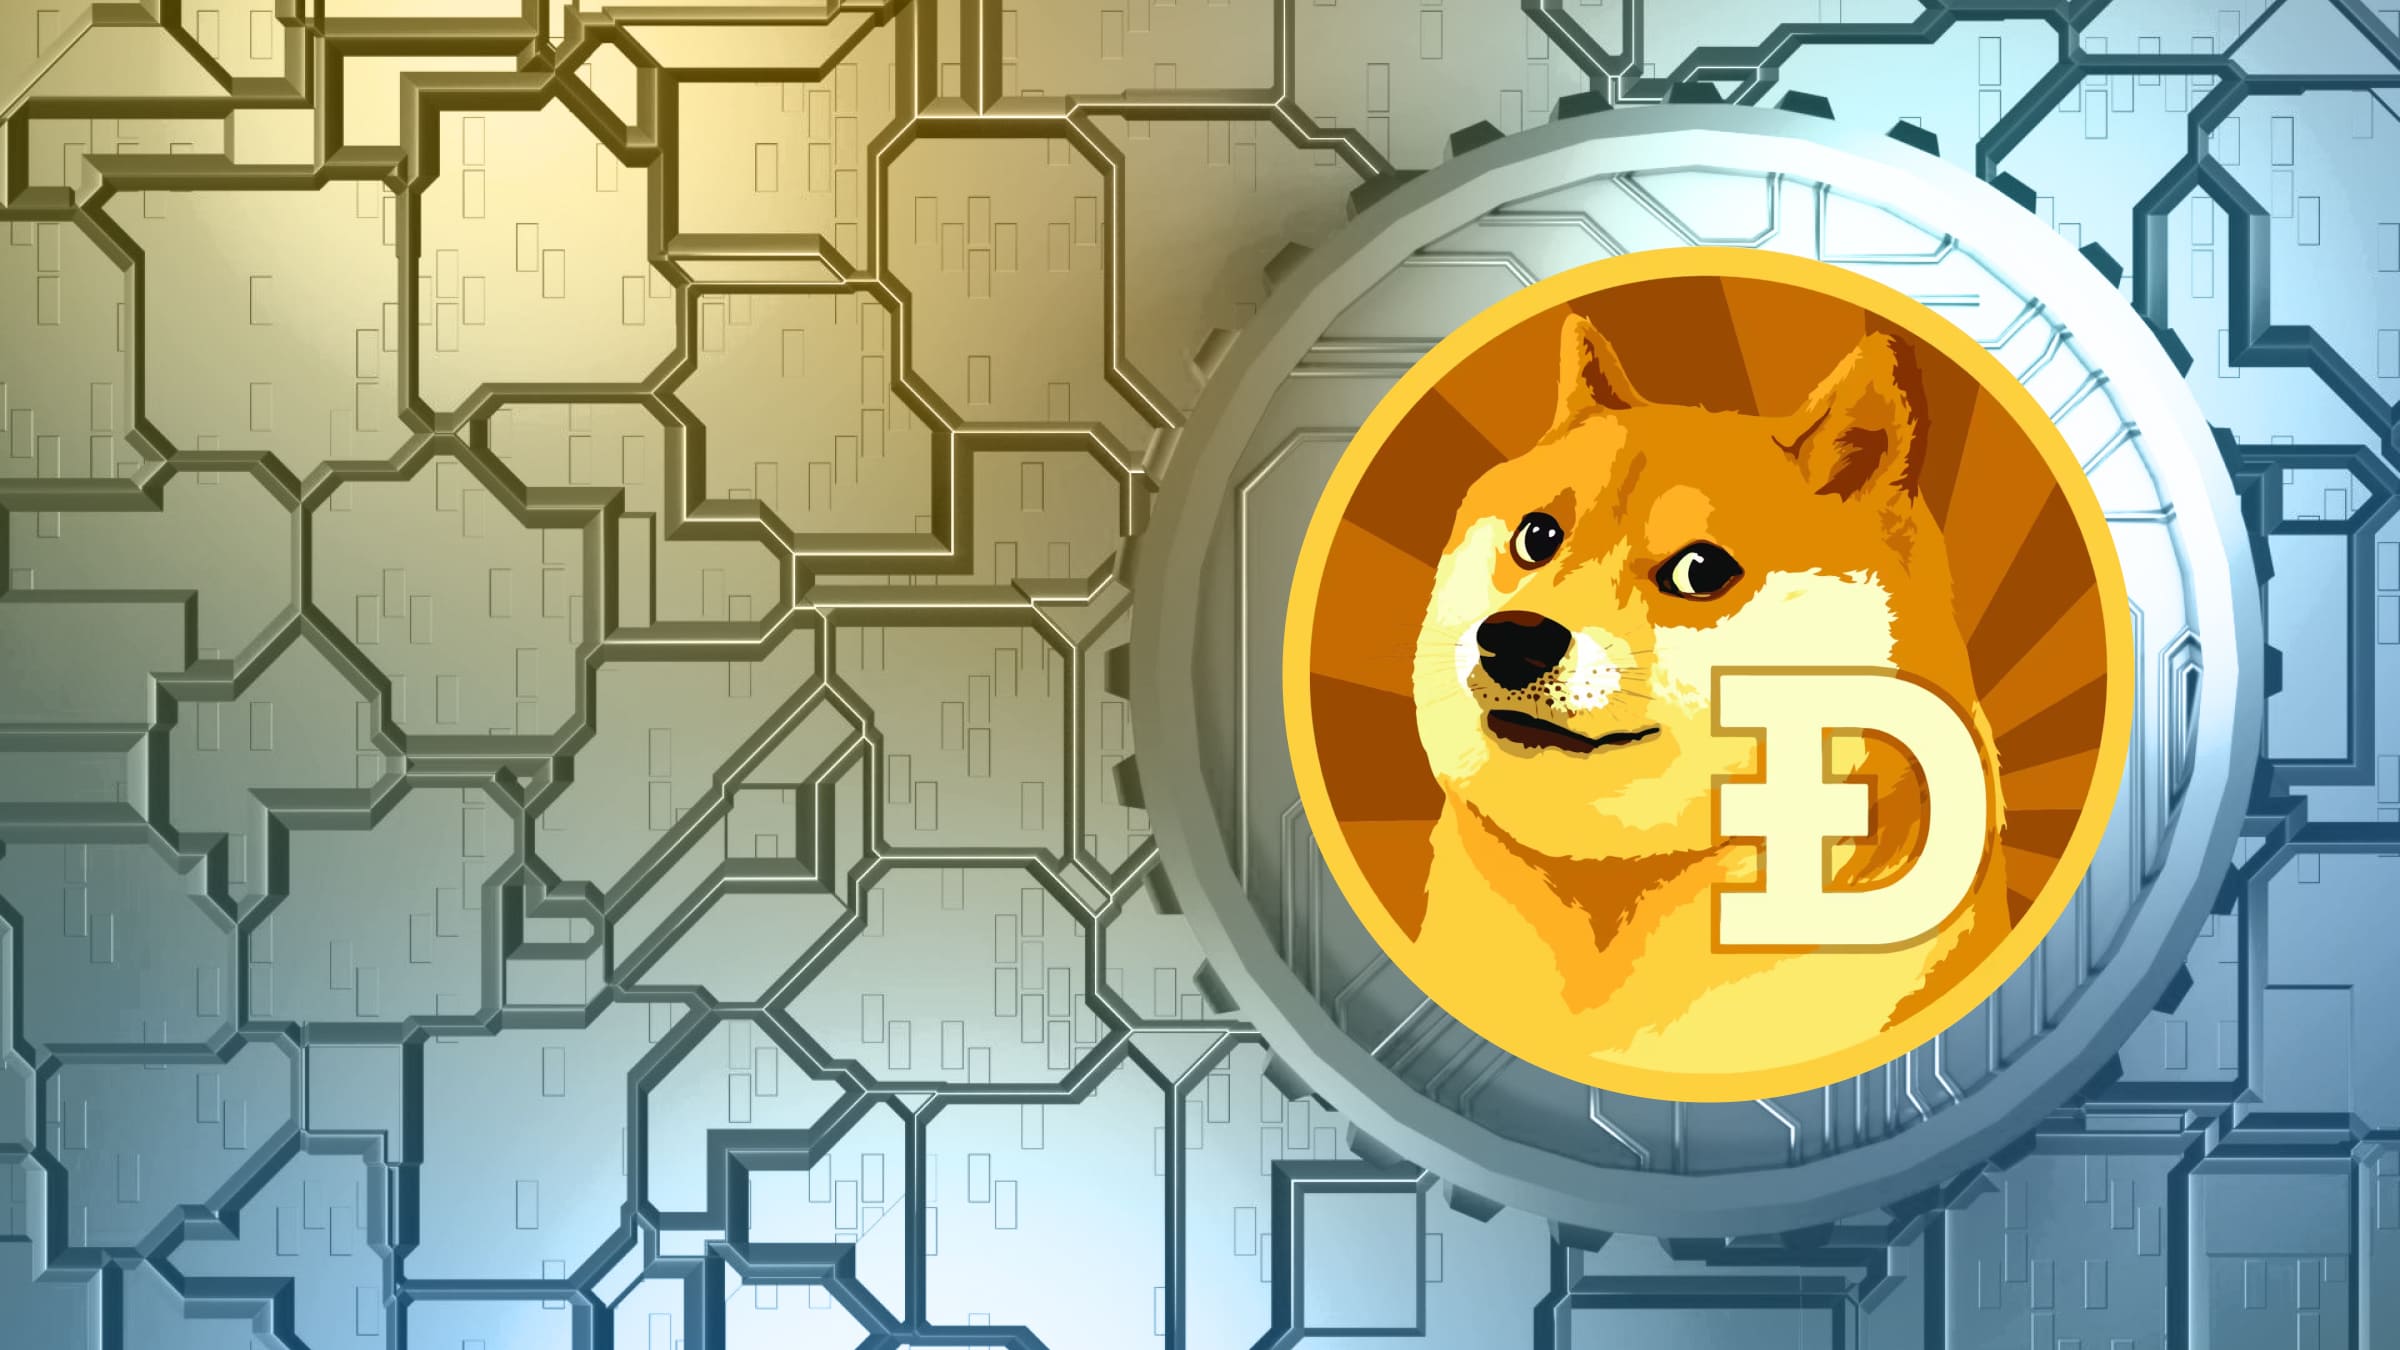 Dogecoin is a cryptocurrency that was launched in 2013 and runs on open-source code.